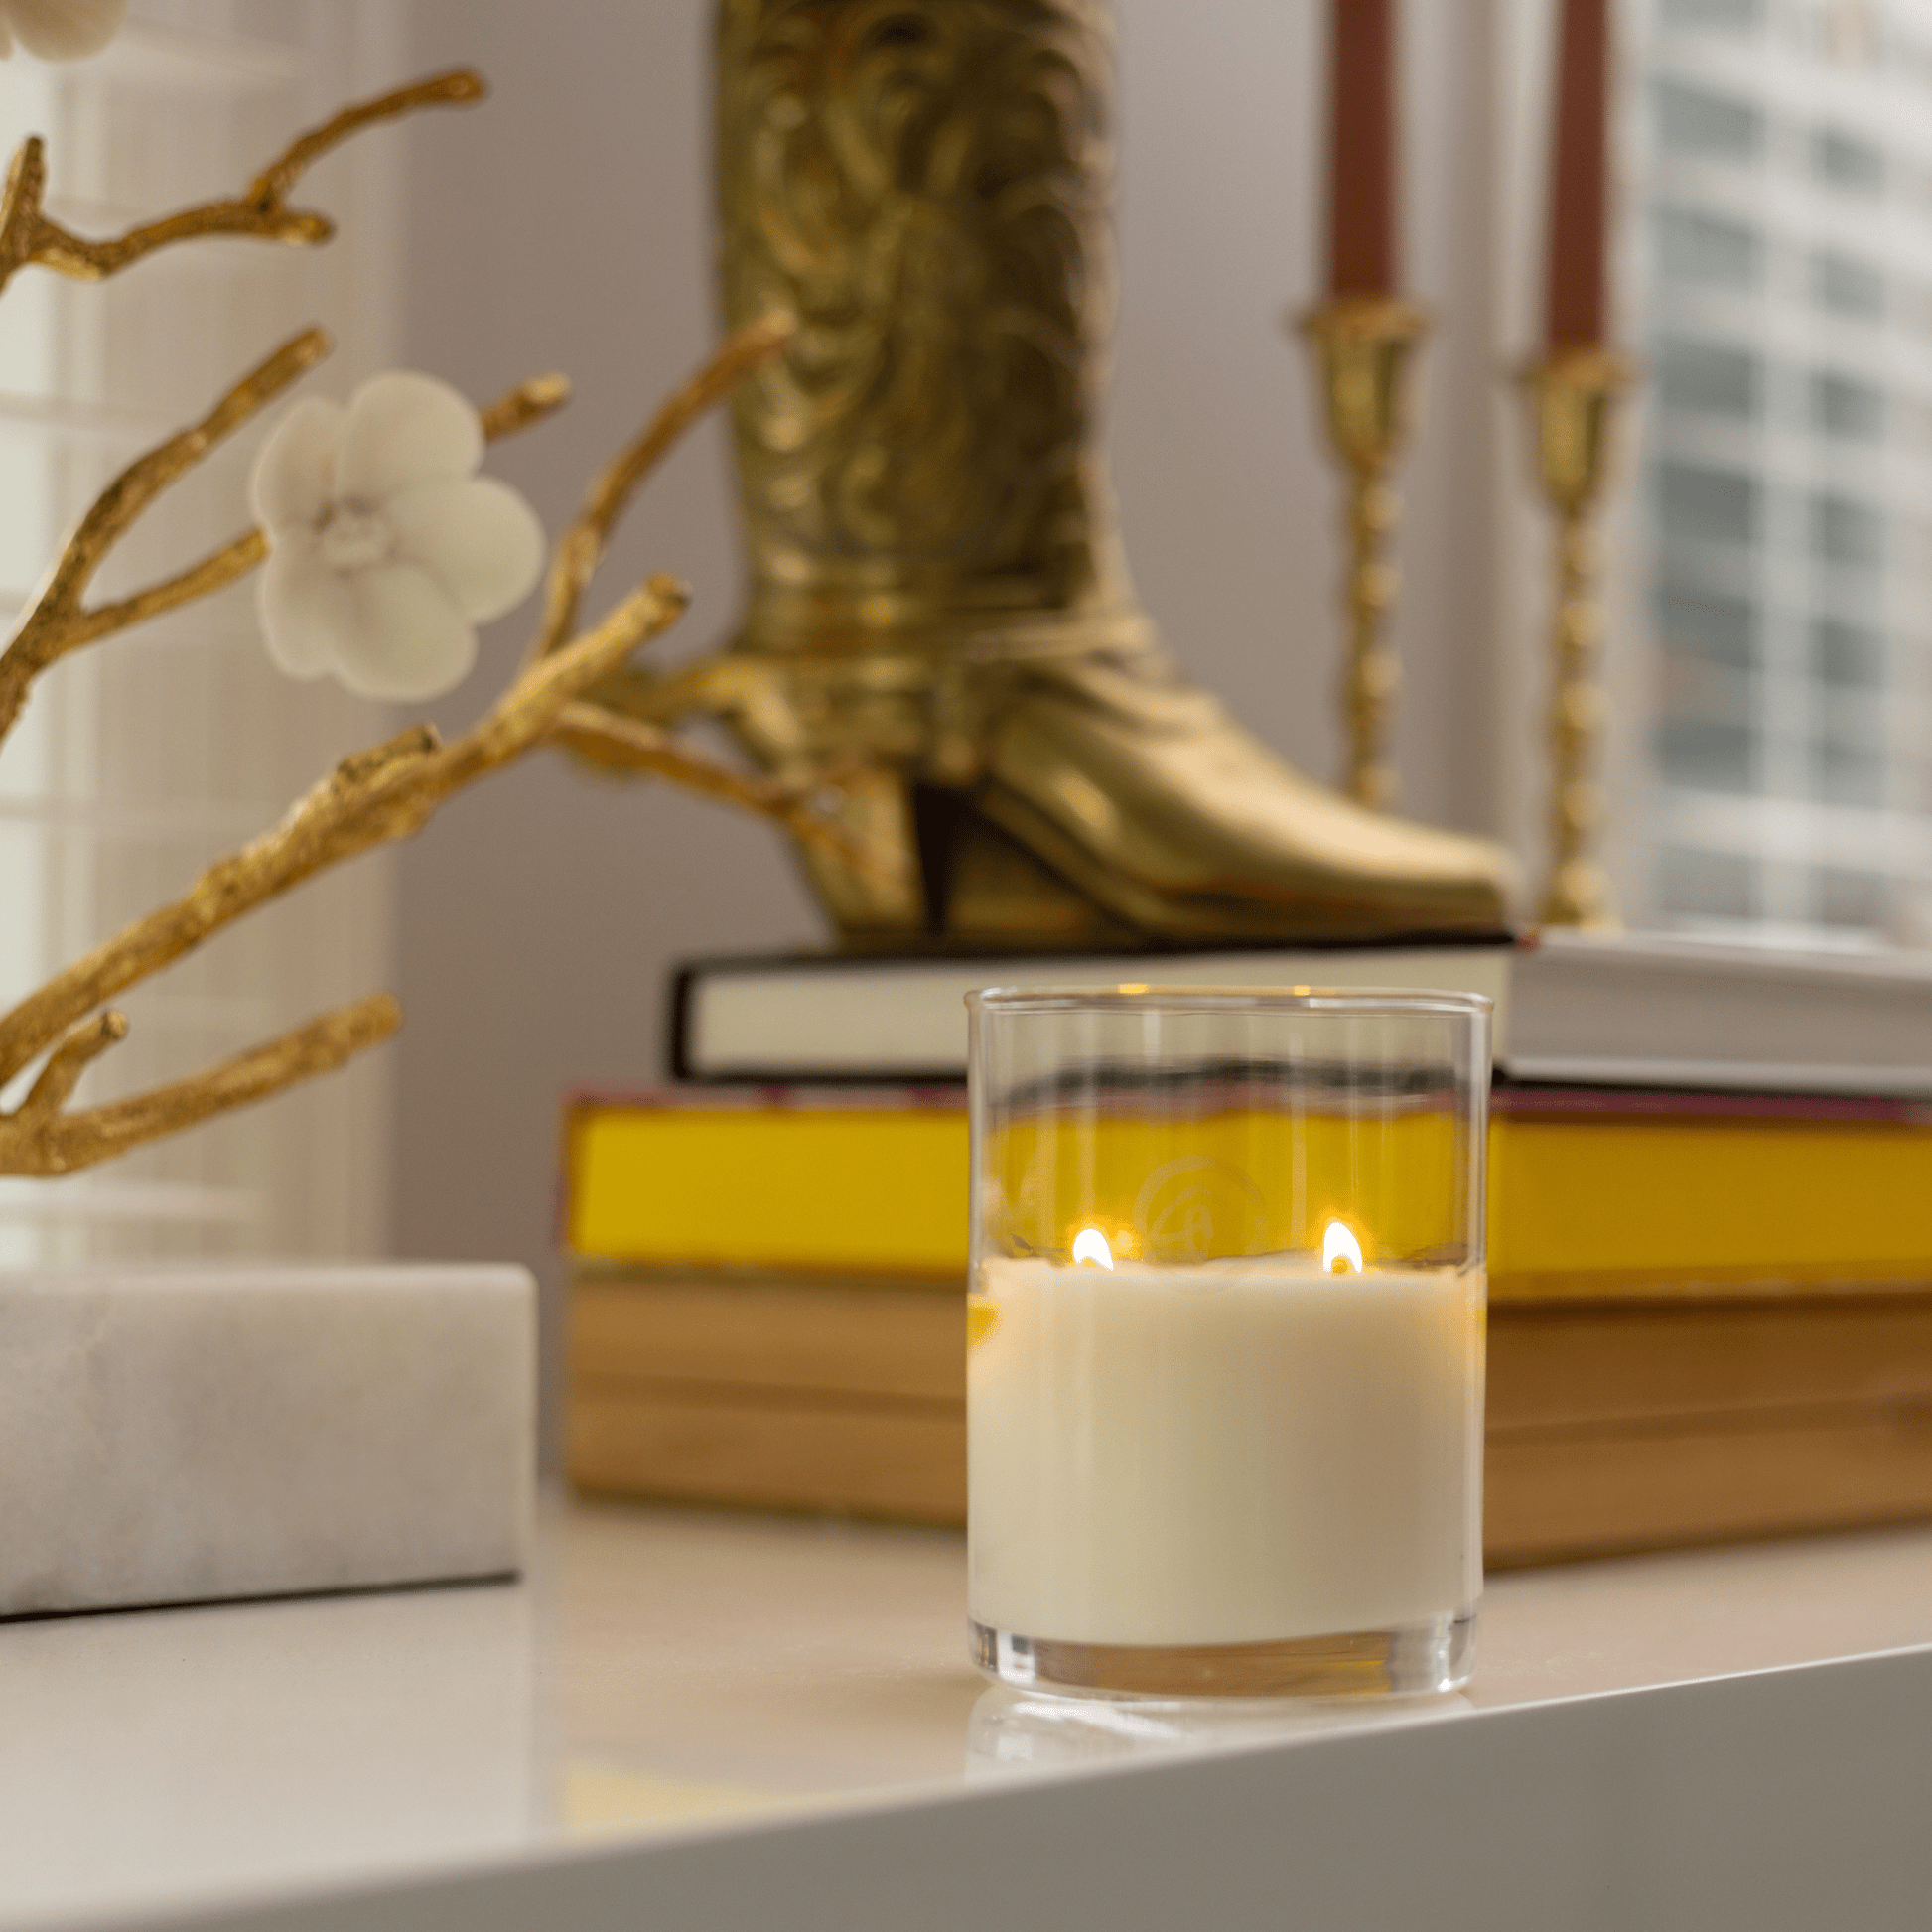 Clarity 10oz candle on table with books and home decor in background